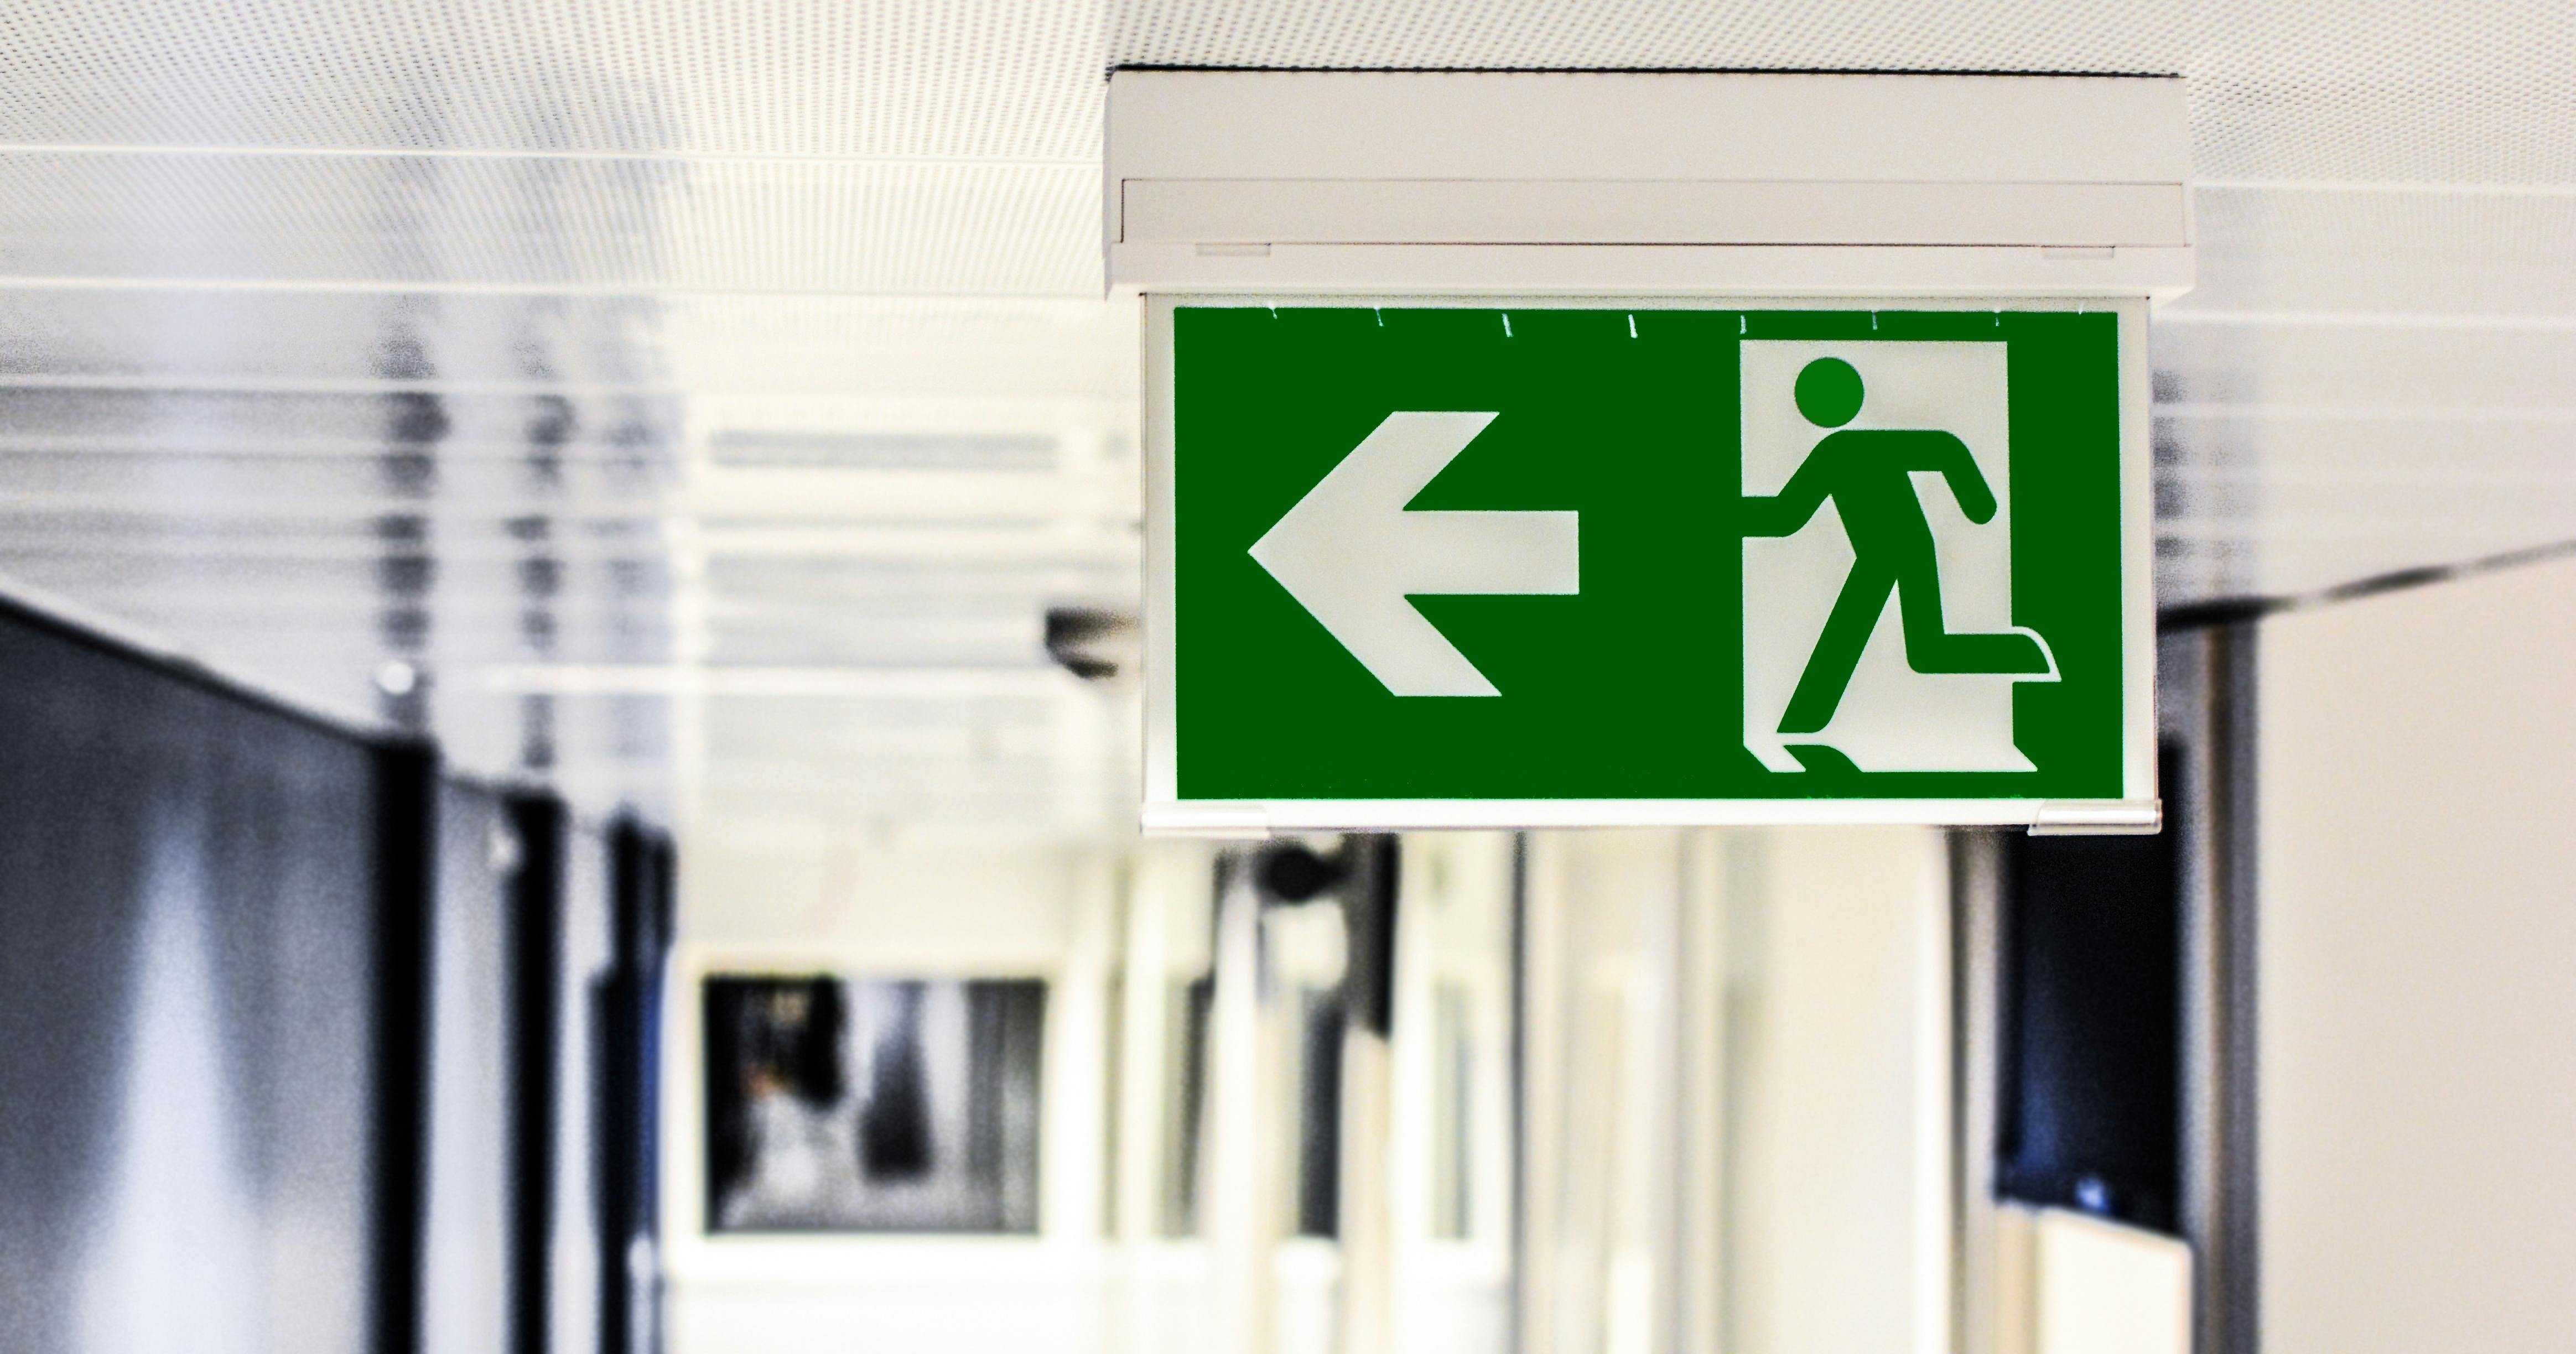 A green emergency exit signs points toward the door in a commercial building.